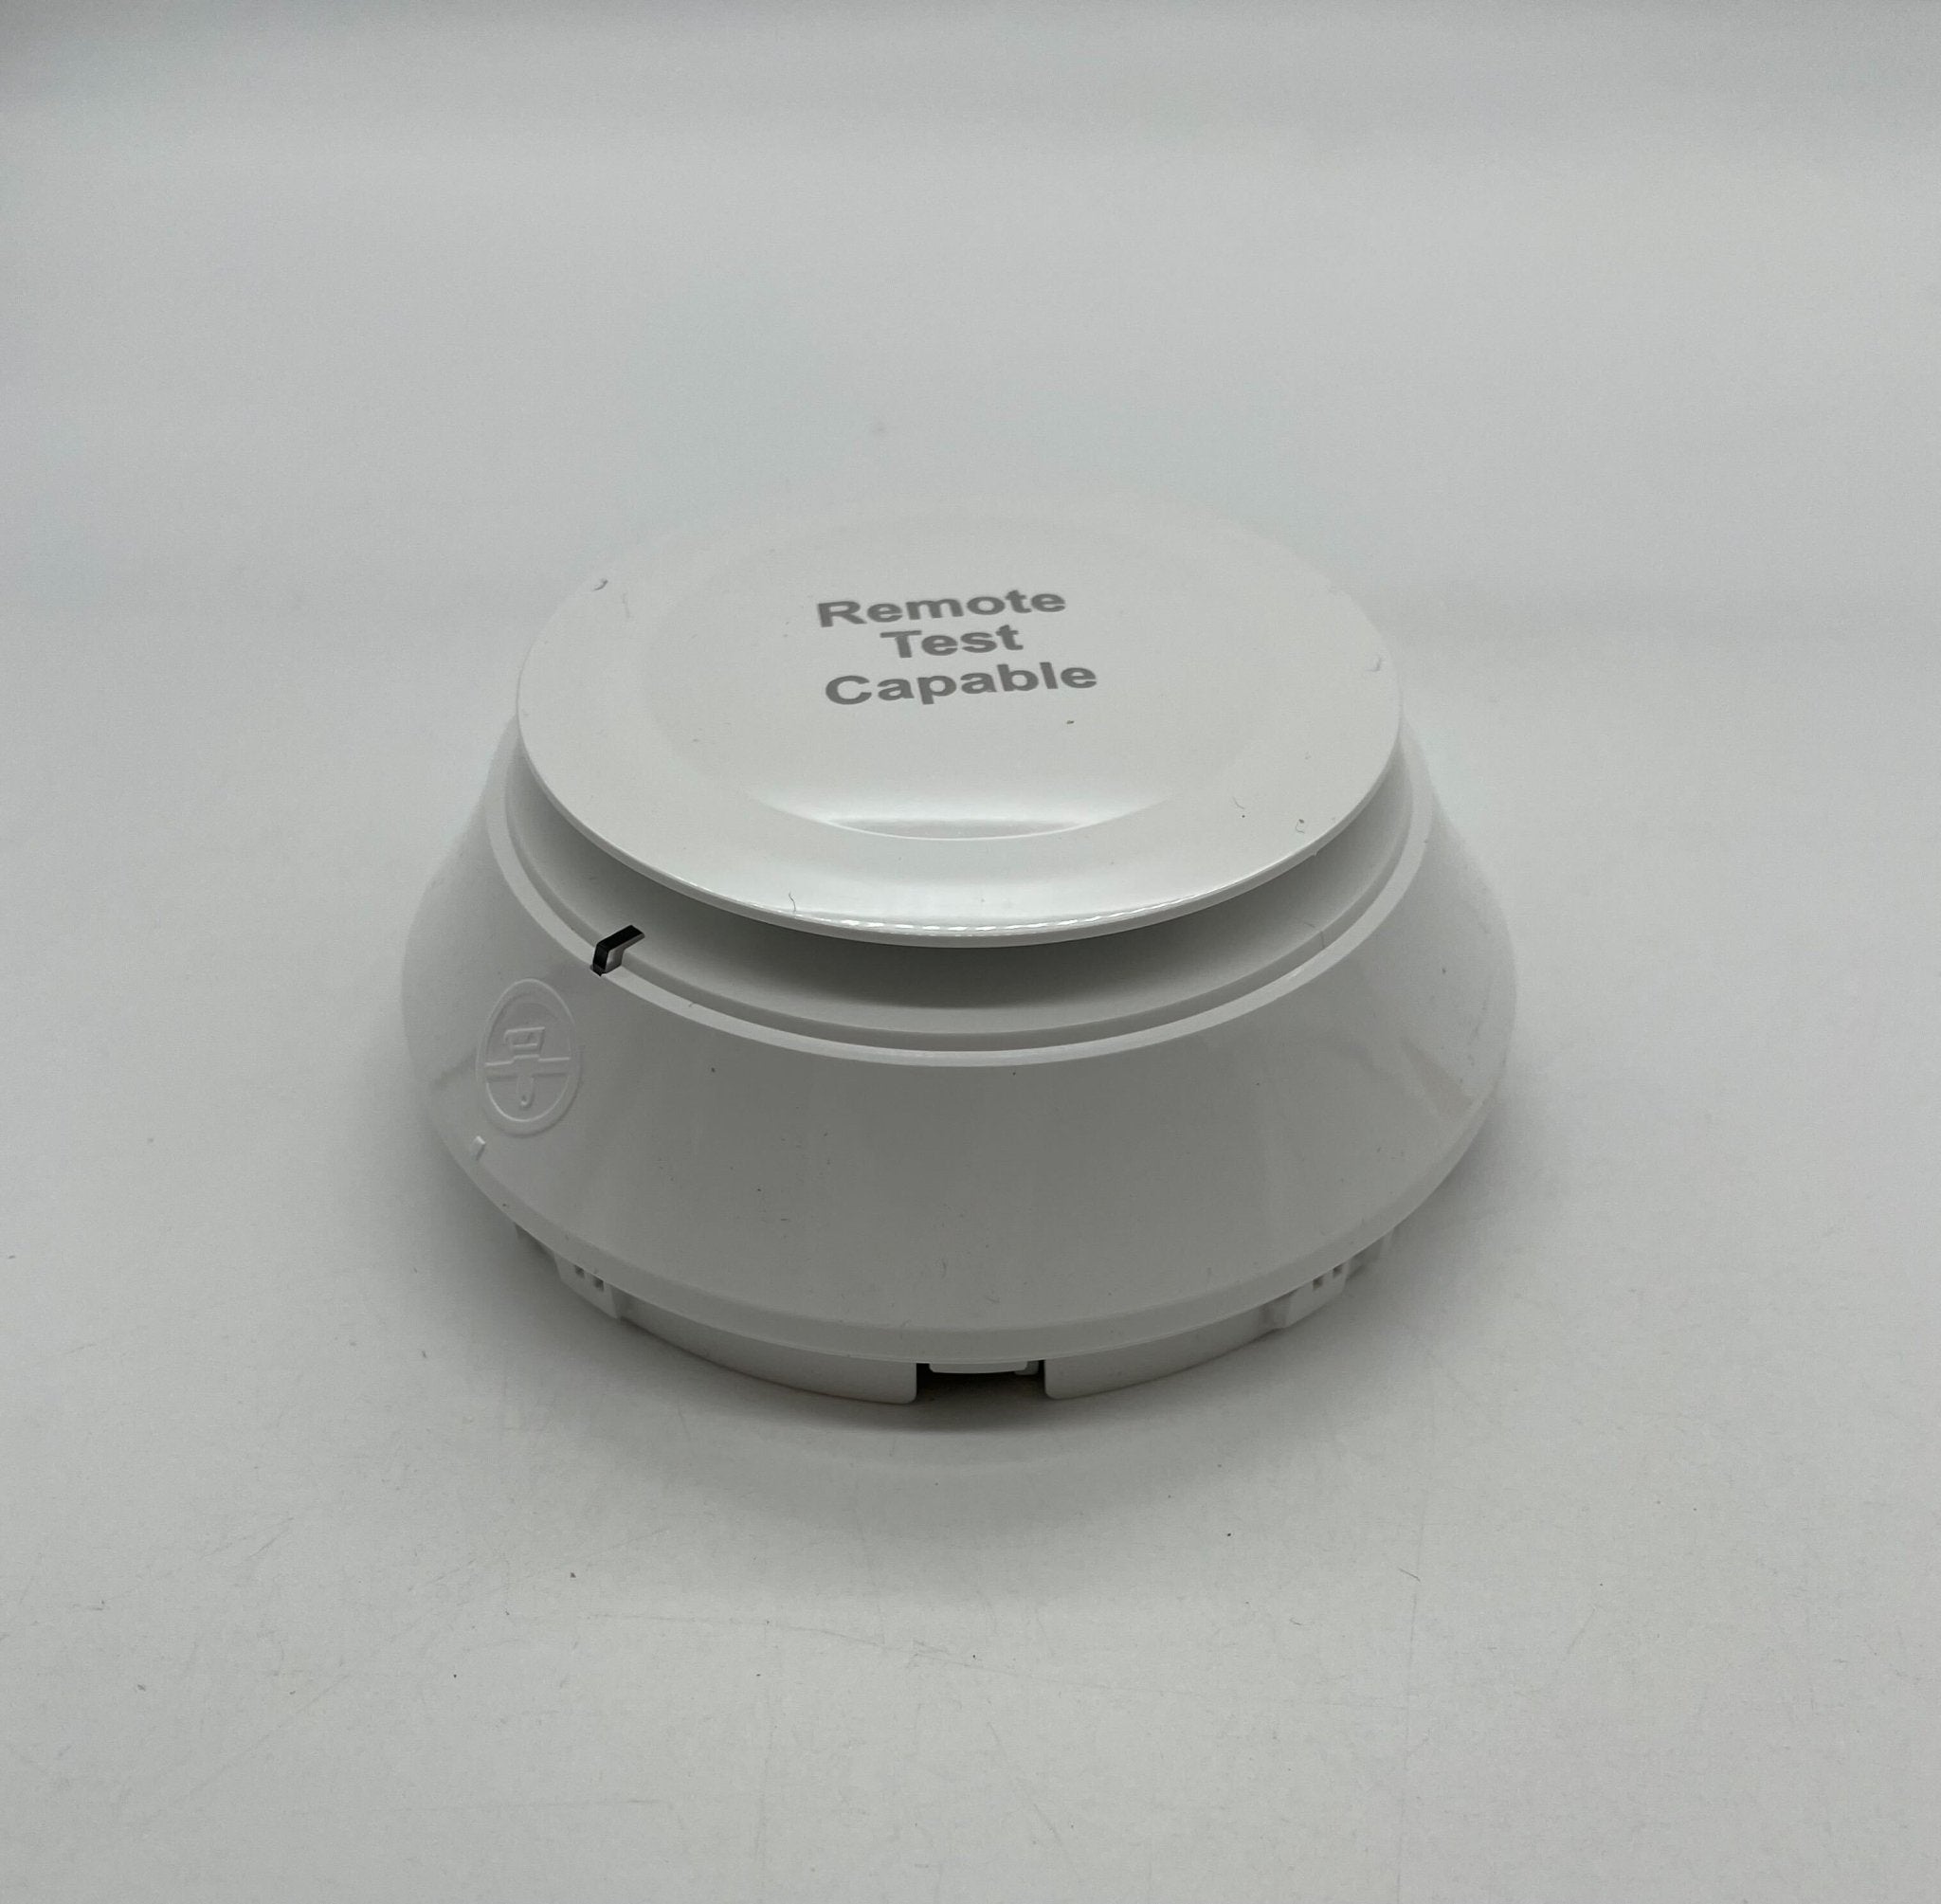 Silent Knight SK-PHOTO-R-W - The Fire Alarm Supplier